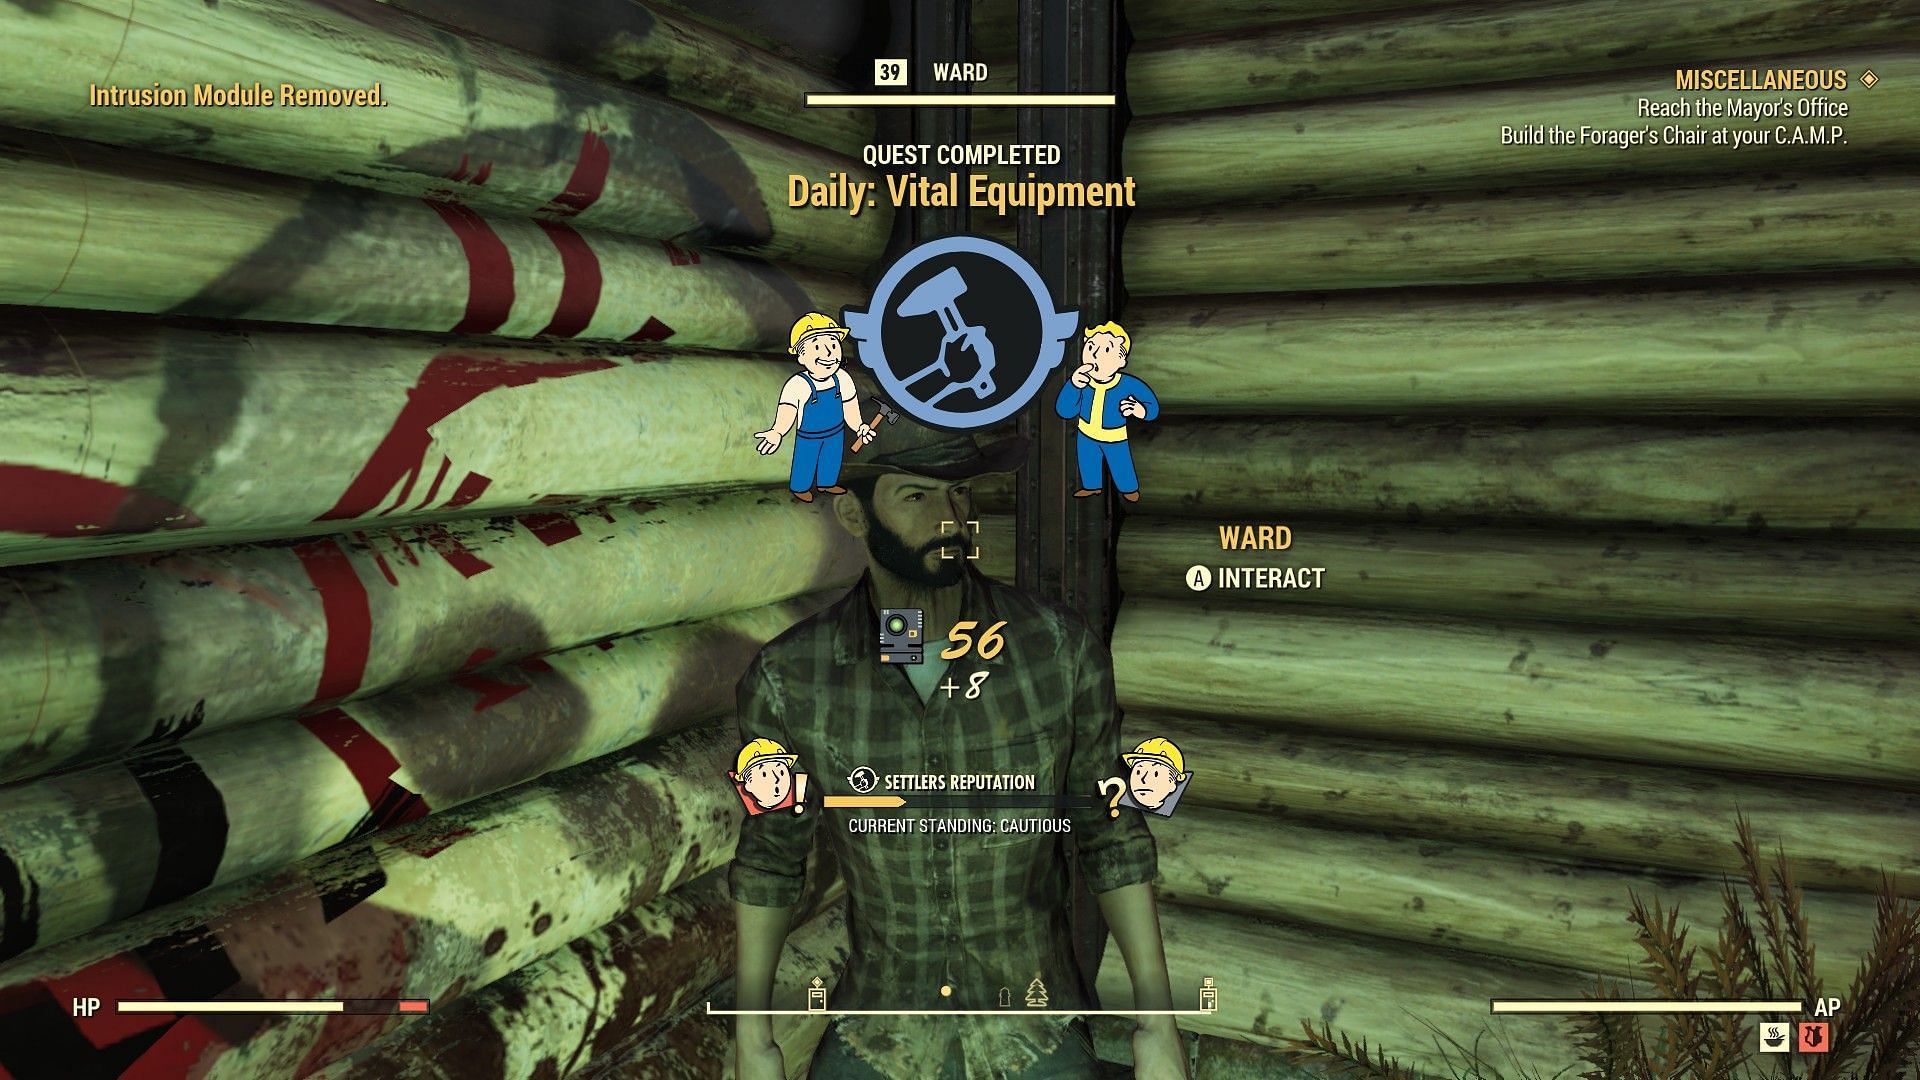 A player completing a quest in Fallout 76 (Image via Bethesda)